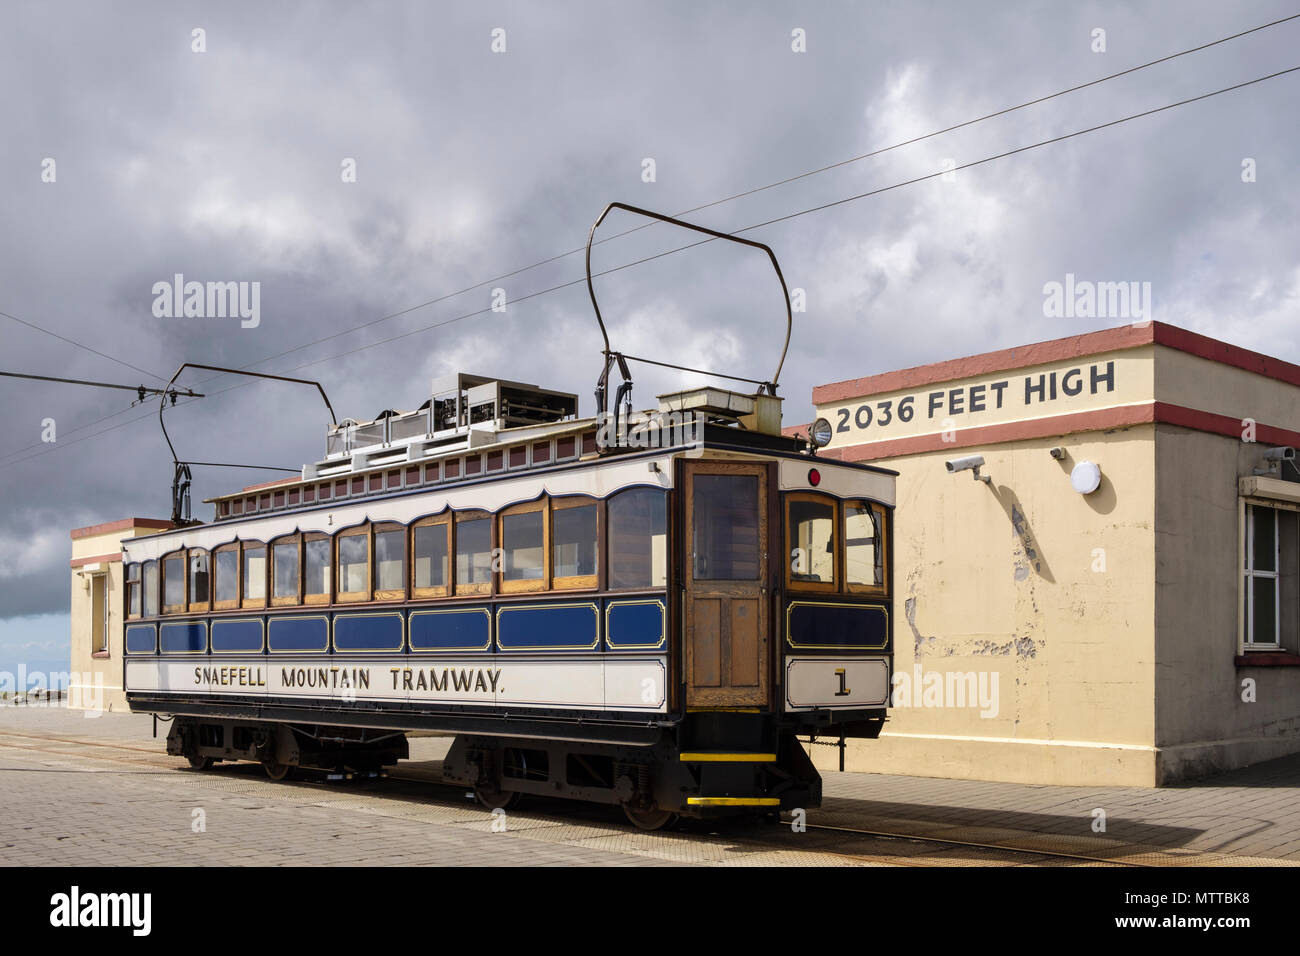 Snaefell Mountain Tramway electric railcar train carriage number 1, built 1895, waiting at the summit station cafe. Laxey, Isle of Man, British Isles Stock Photo